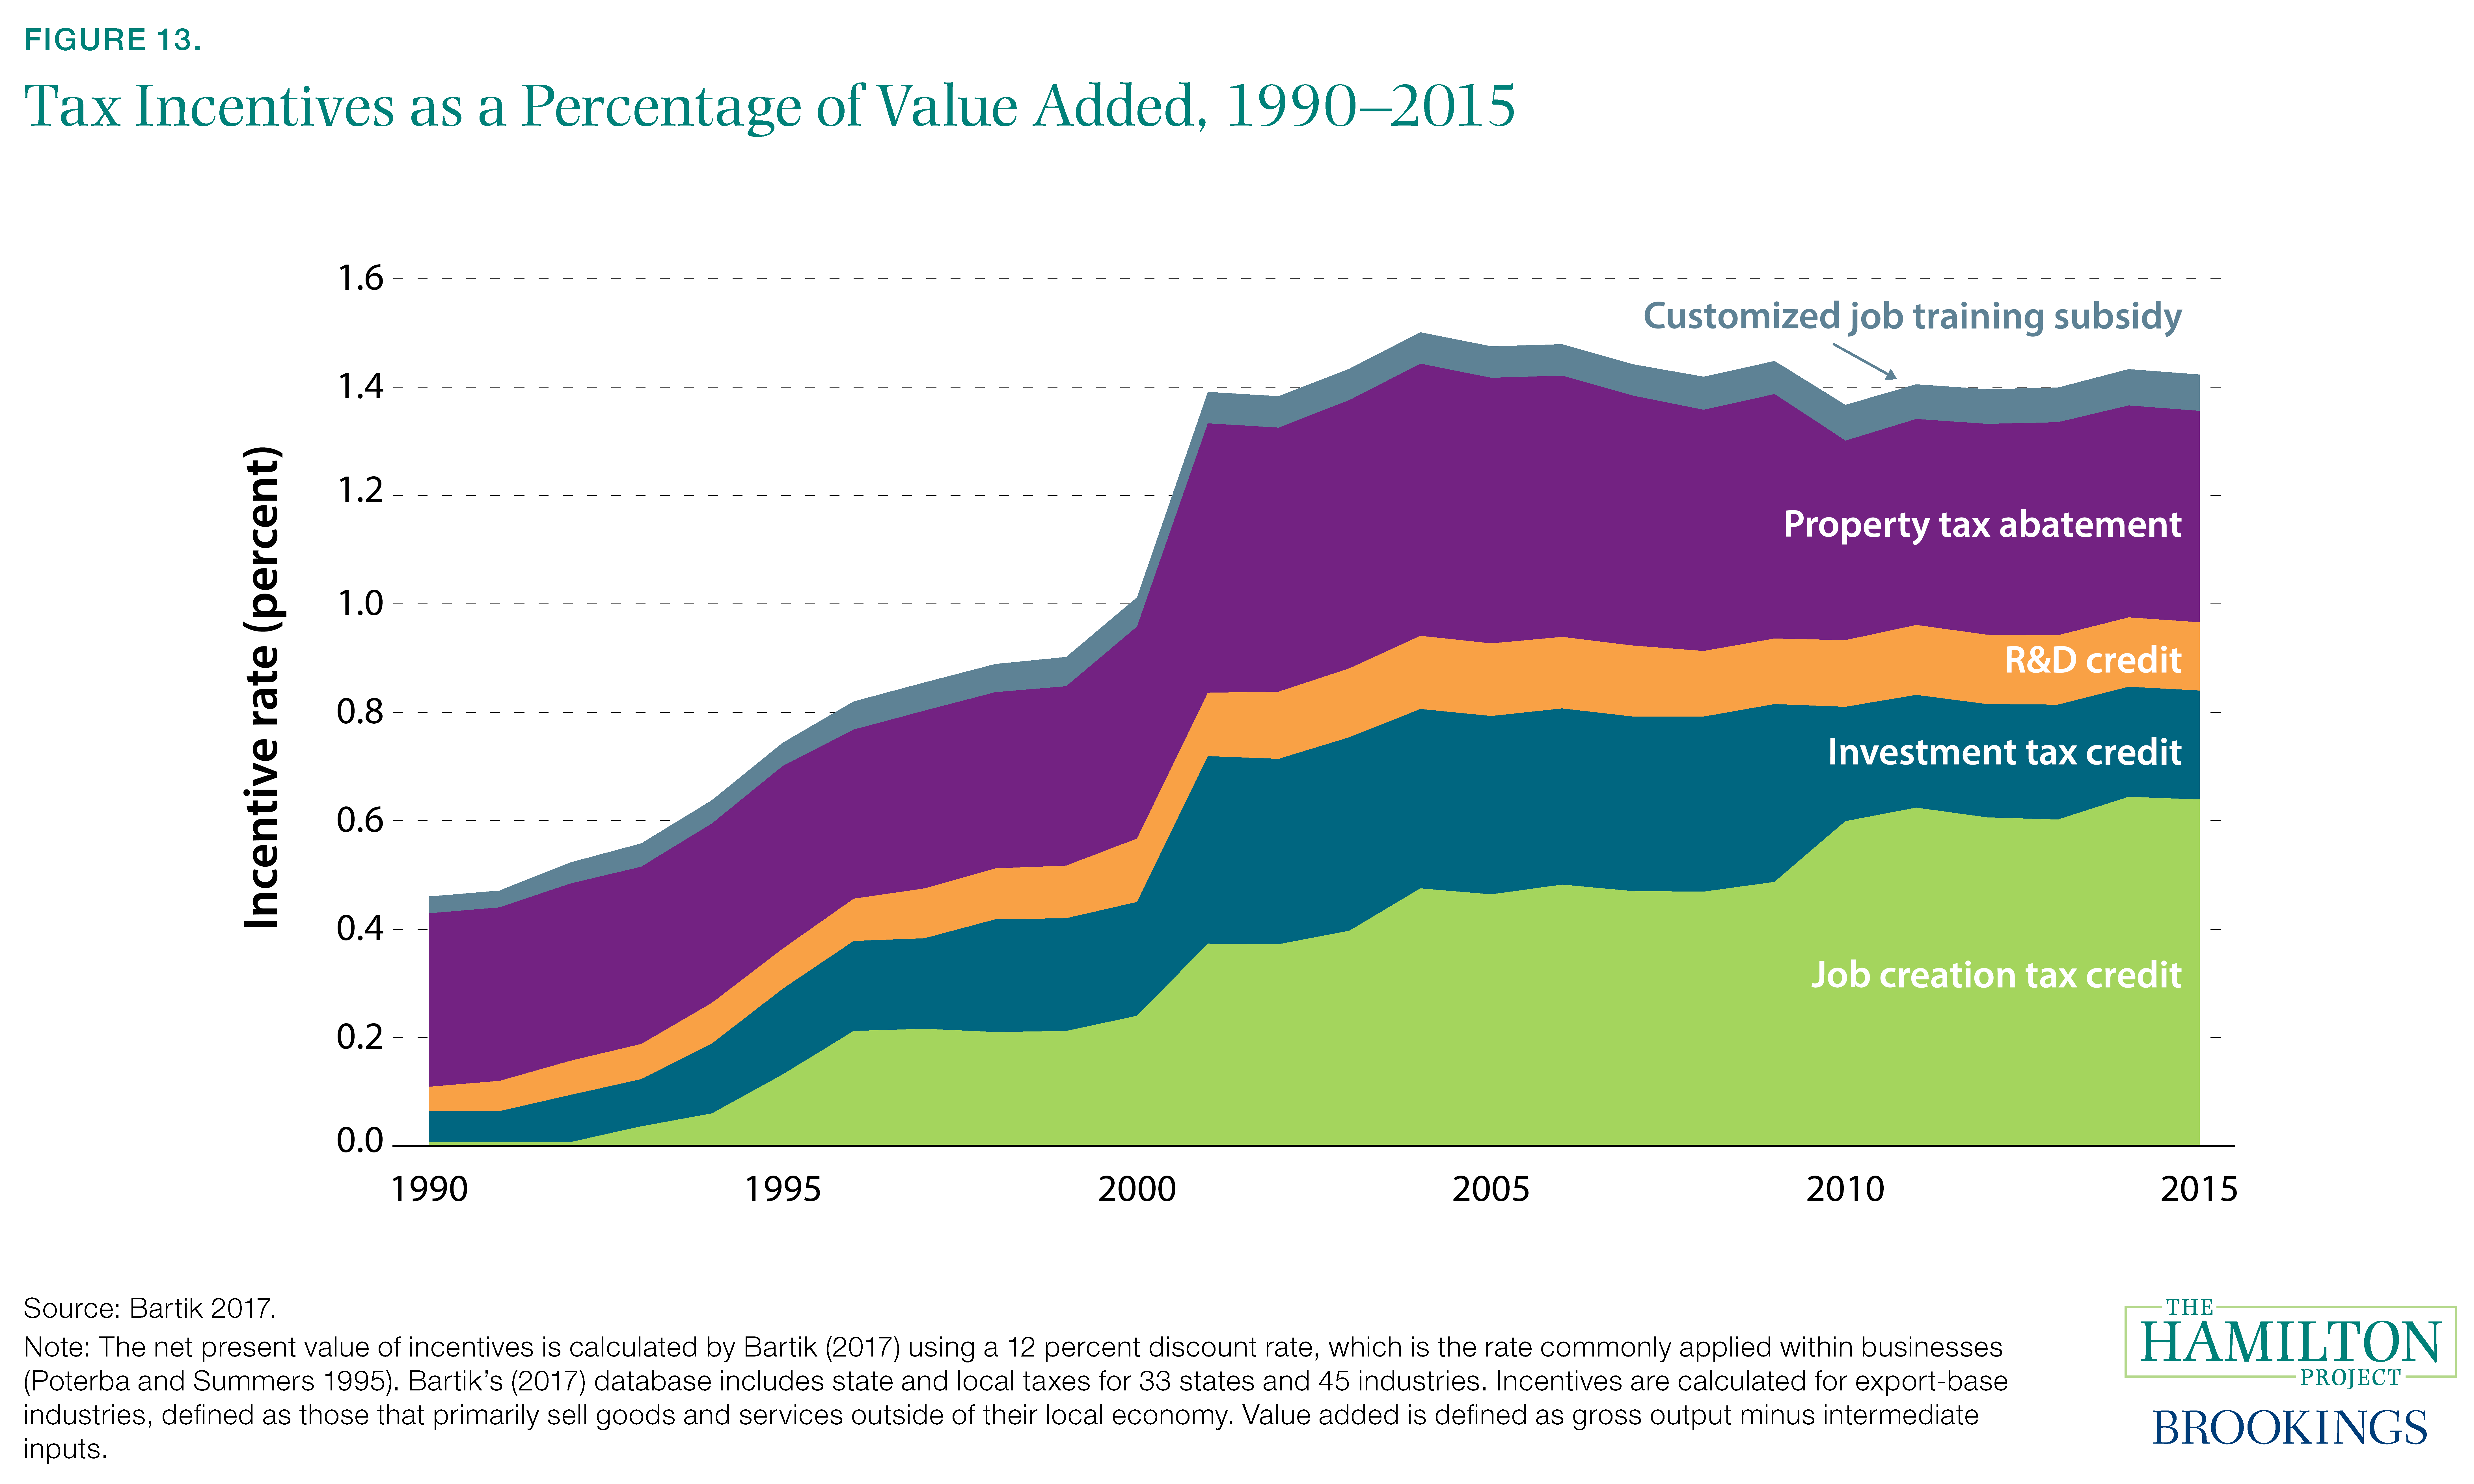 Figure 13. Tax Incentives as a Percentage of Value Added, 1990–2015